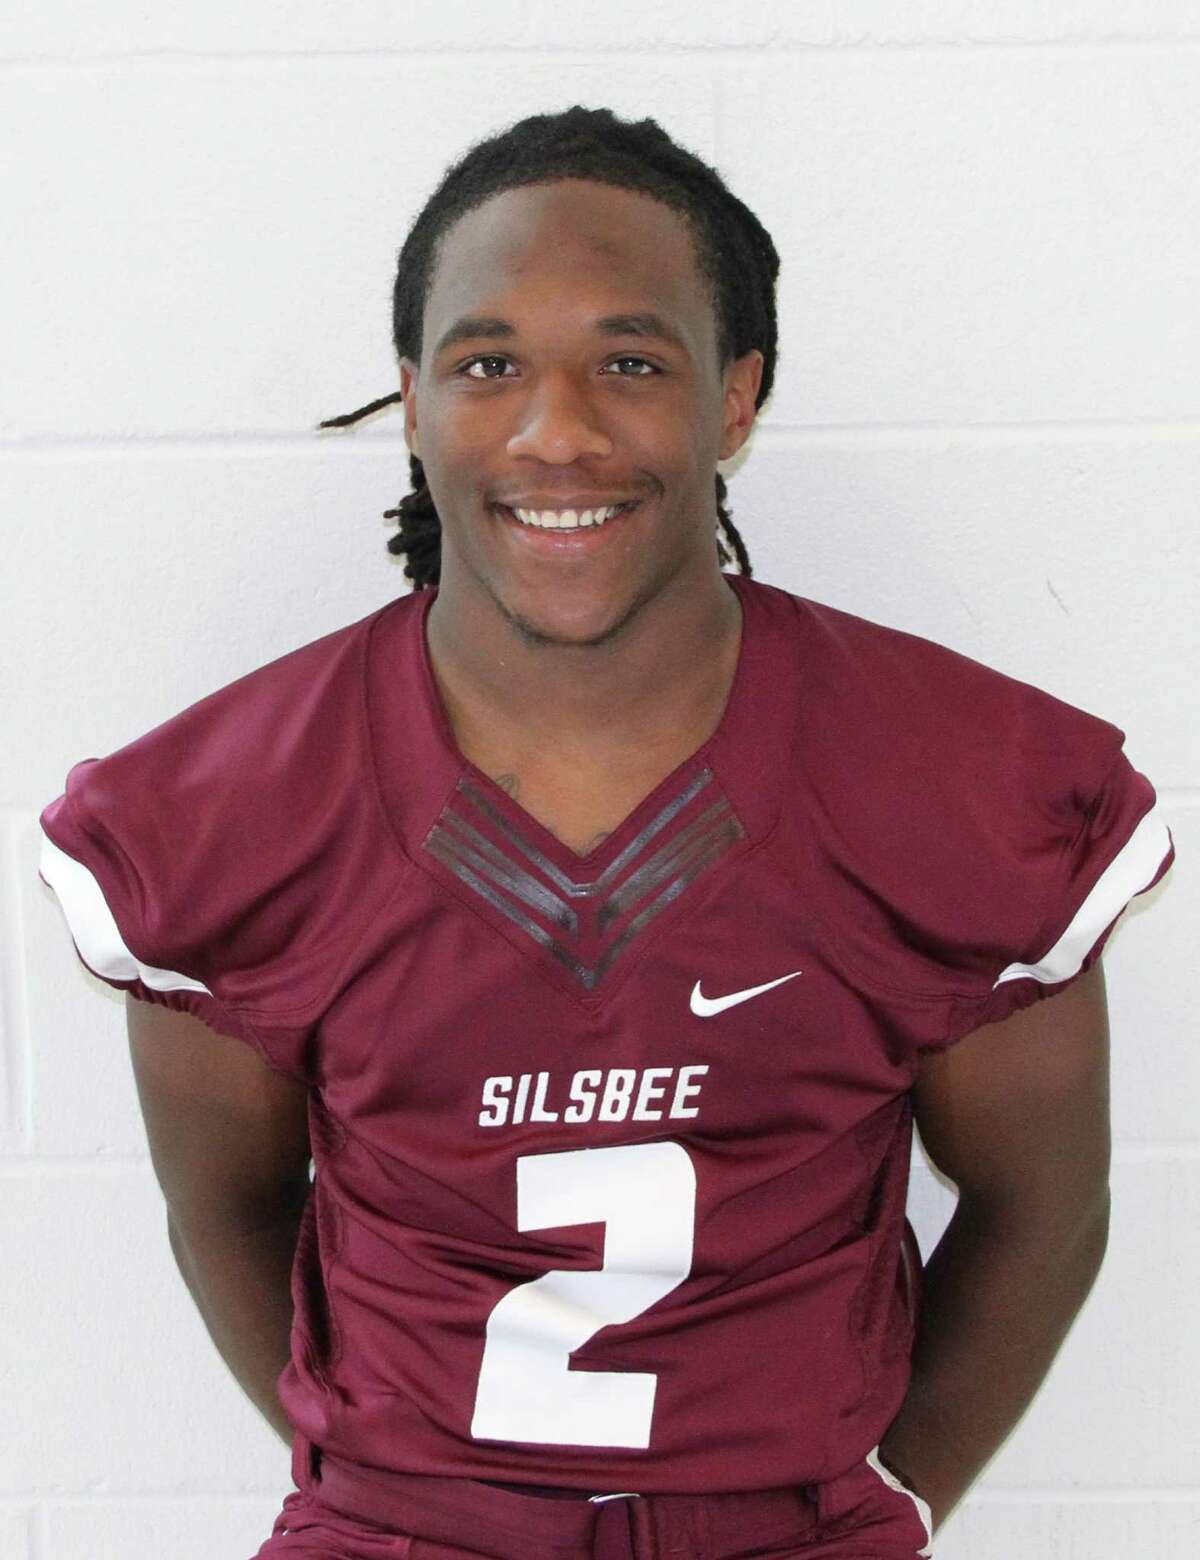 Tavoris Brooks, Silsbee Position: RB  Height: 5-9  Weight: 185 pounds  Grade: Senior  Despite starting only five games last season, Brooks managed to rack up 712 yards and 4 TDs in 2014.